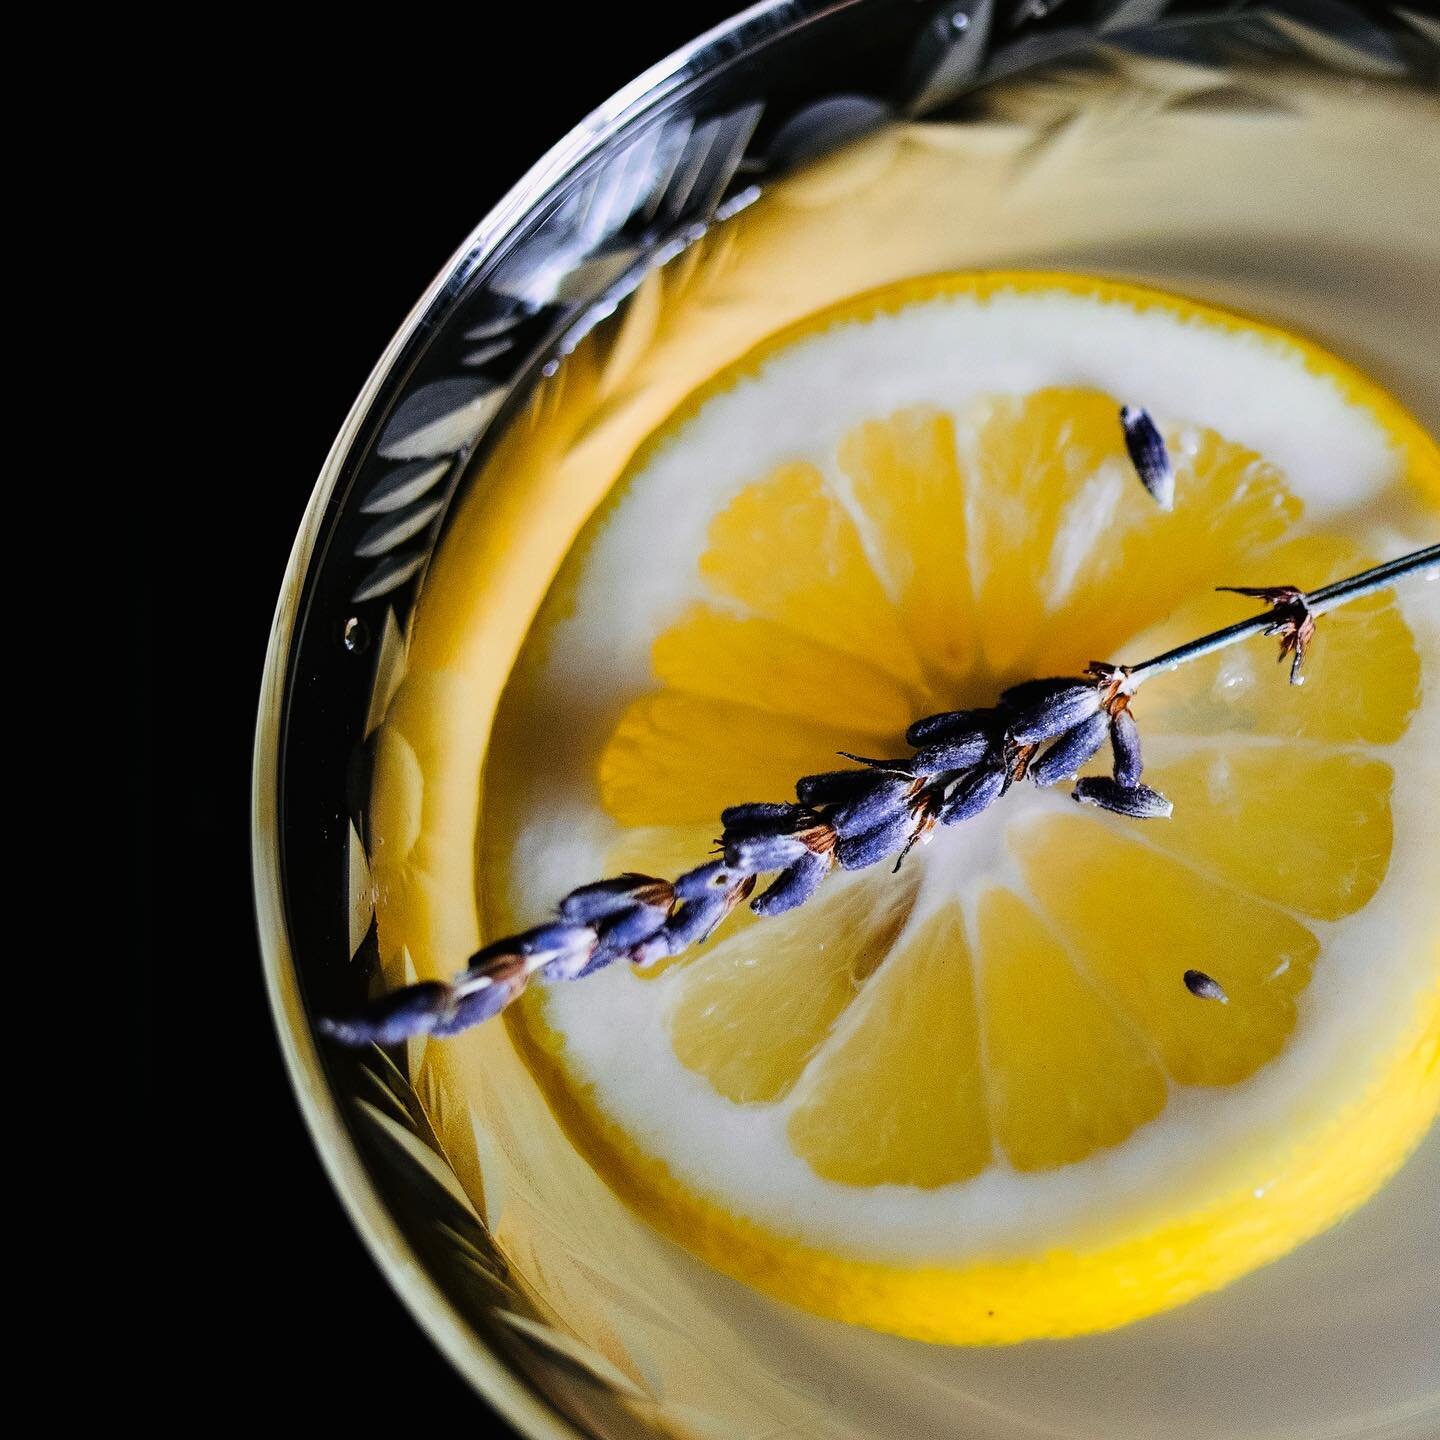 What flavor pairs beautifully with lavender? Lemon, of course! Lavender adds a unique floral note that makes the perfect combination with lemon and different spirits- but especially with gin! Swipe through to see some other popular drinks we recommen